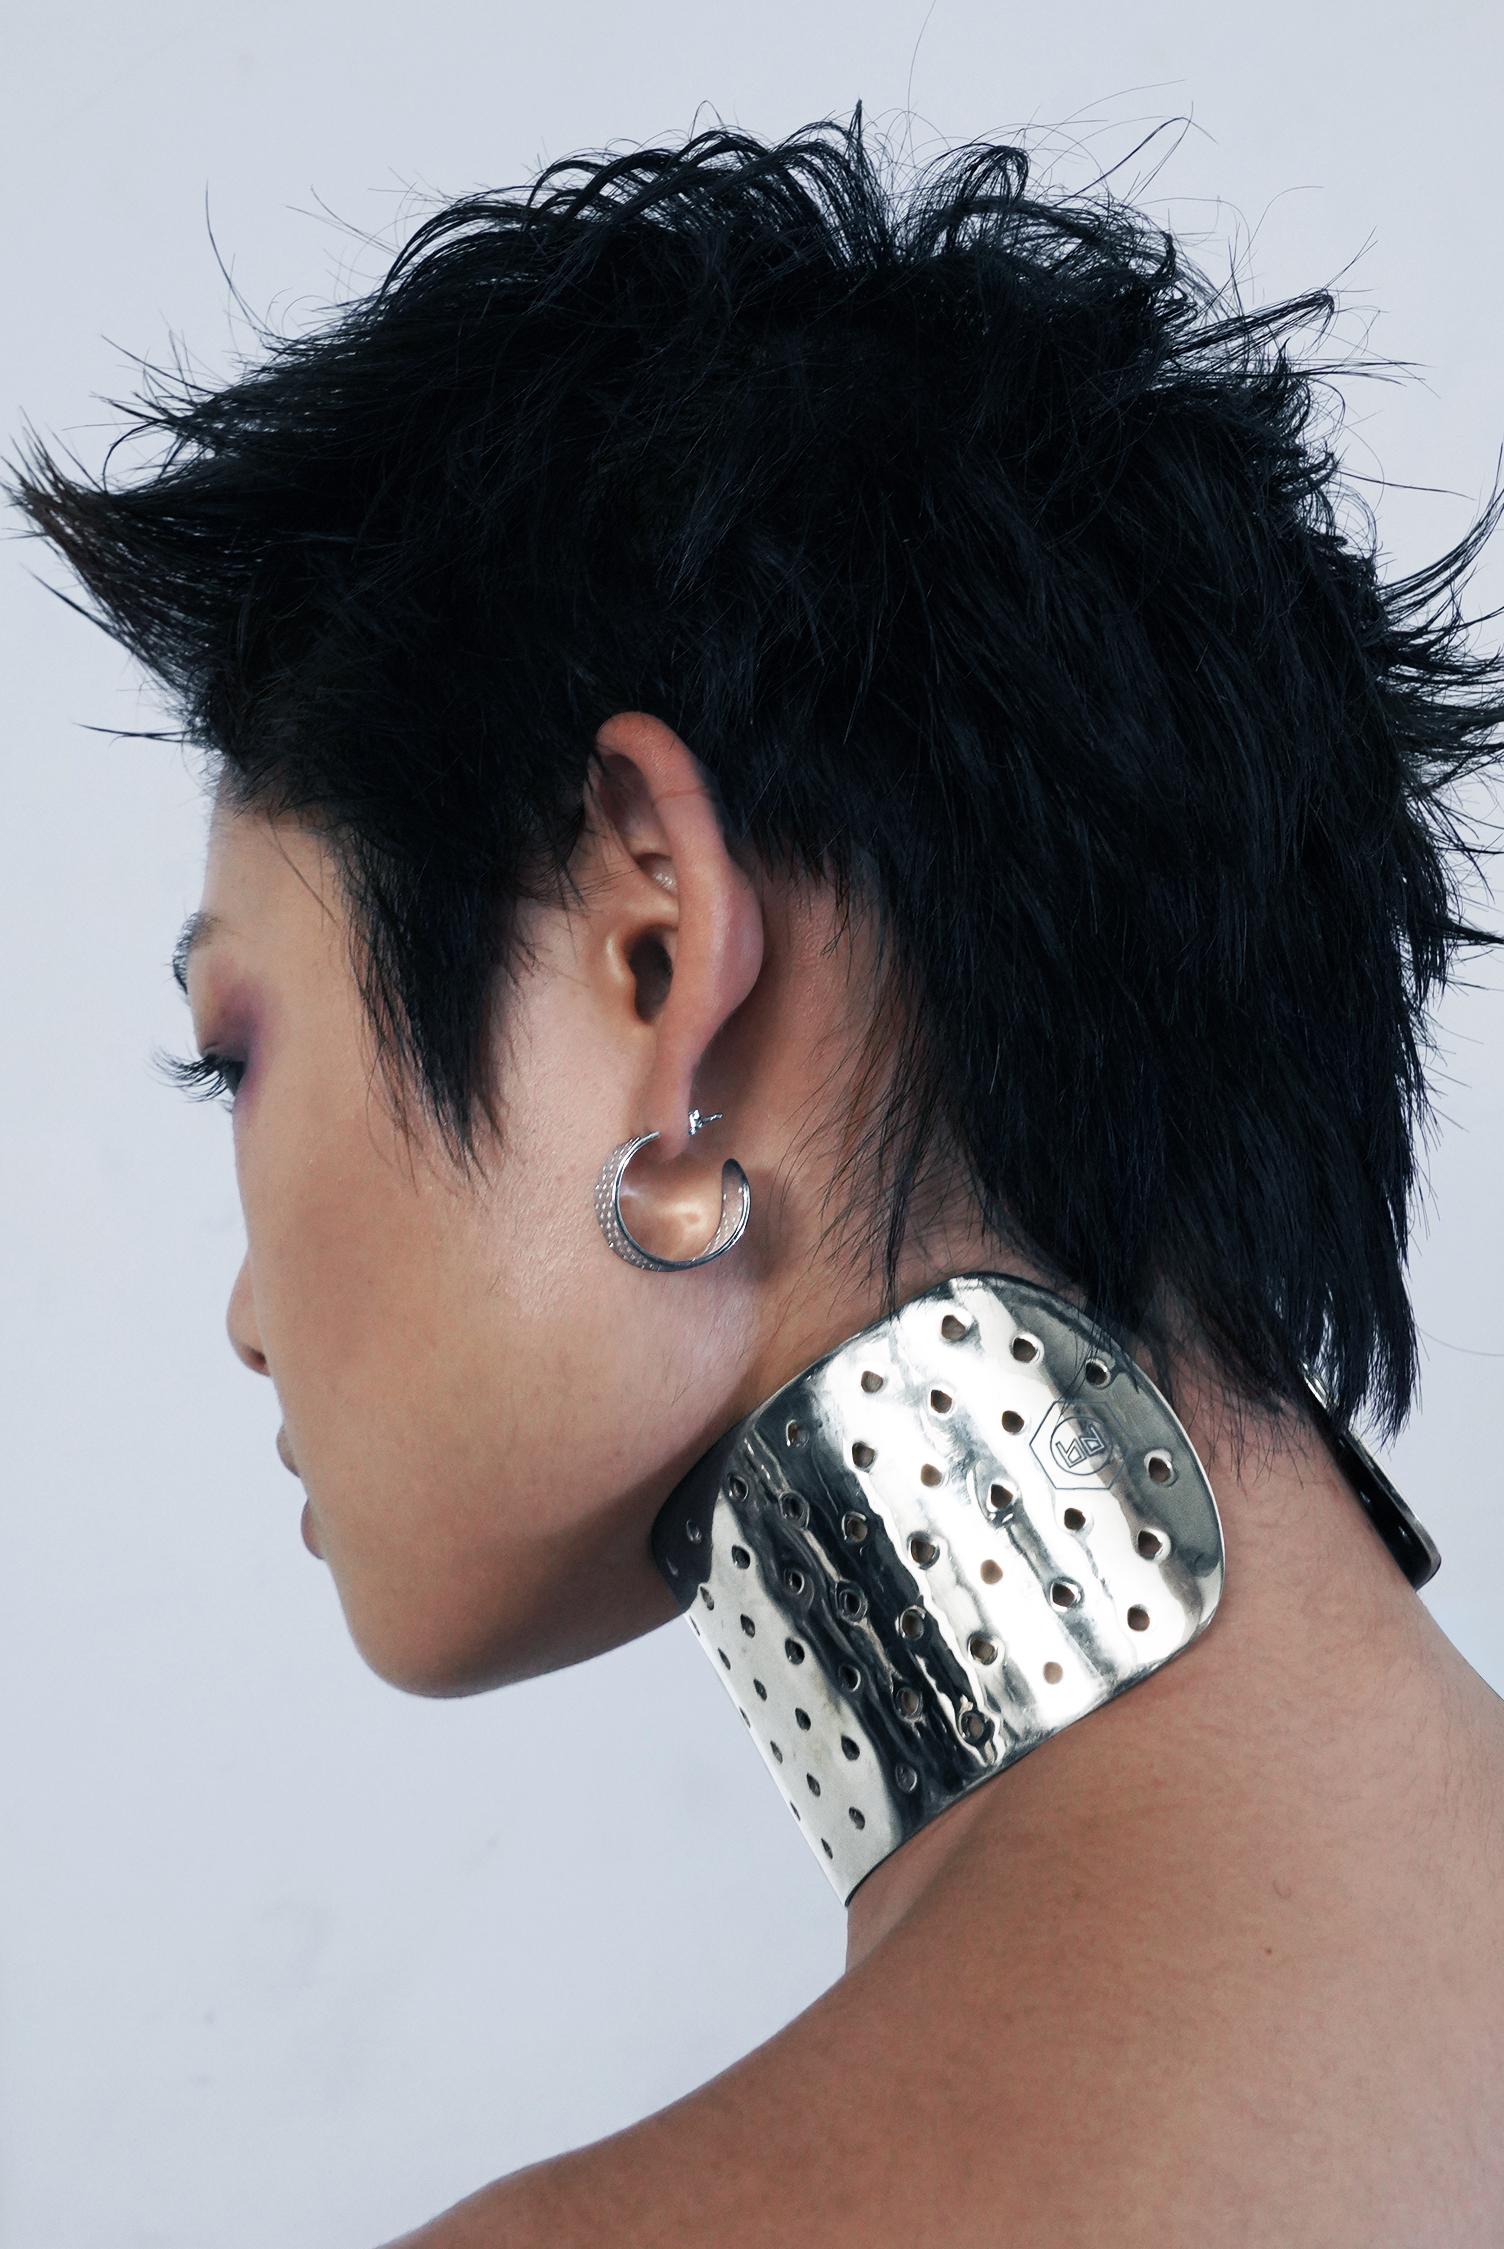 Perforated metal open-back earrings with butterfly clasp closures and a high-polish finish. Wear individually, as a pair, or mix + match with a Perforated Cuff Earring. Made by BOND HARDWARE.

BOND Hardware is a sustainable jewelry and accessories